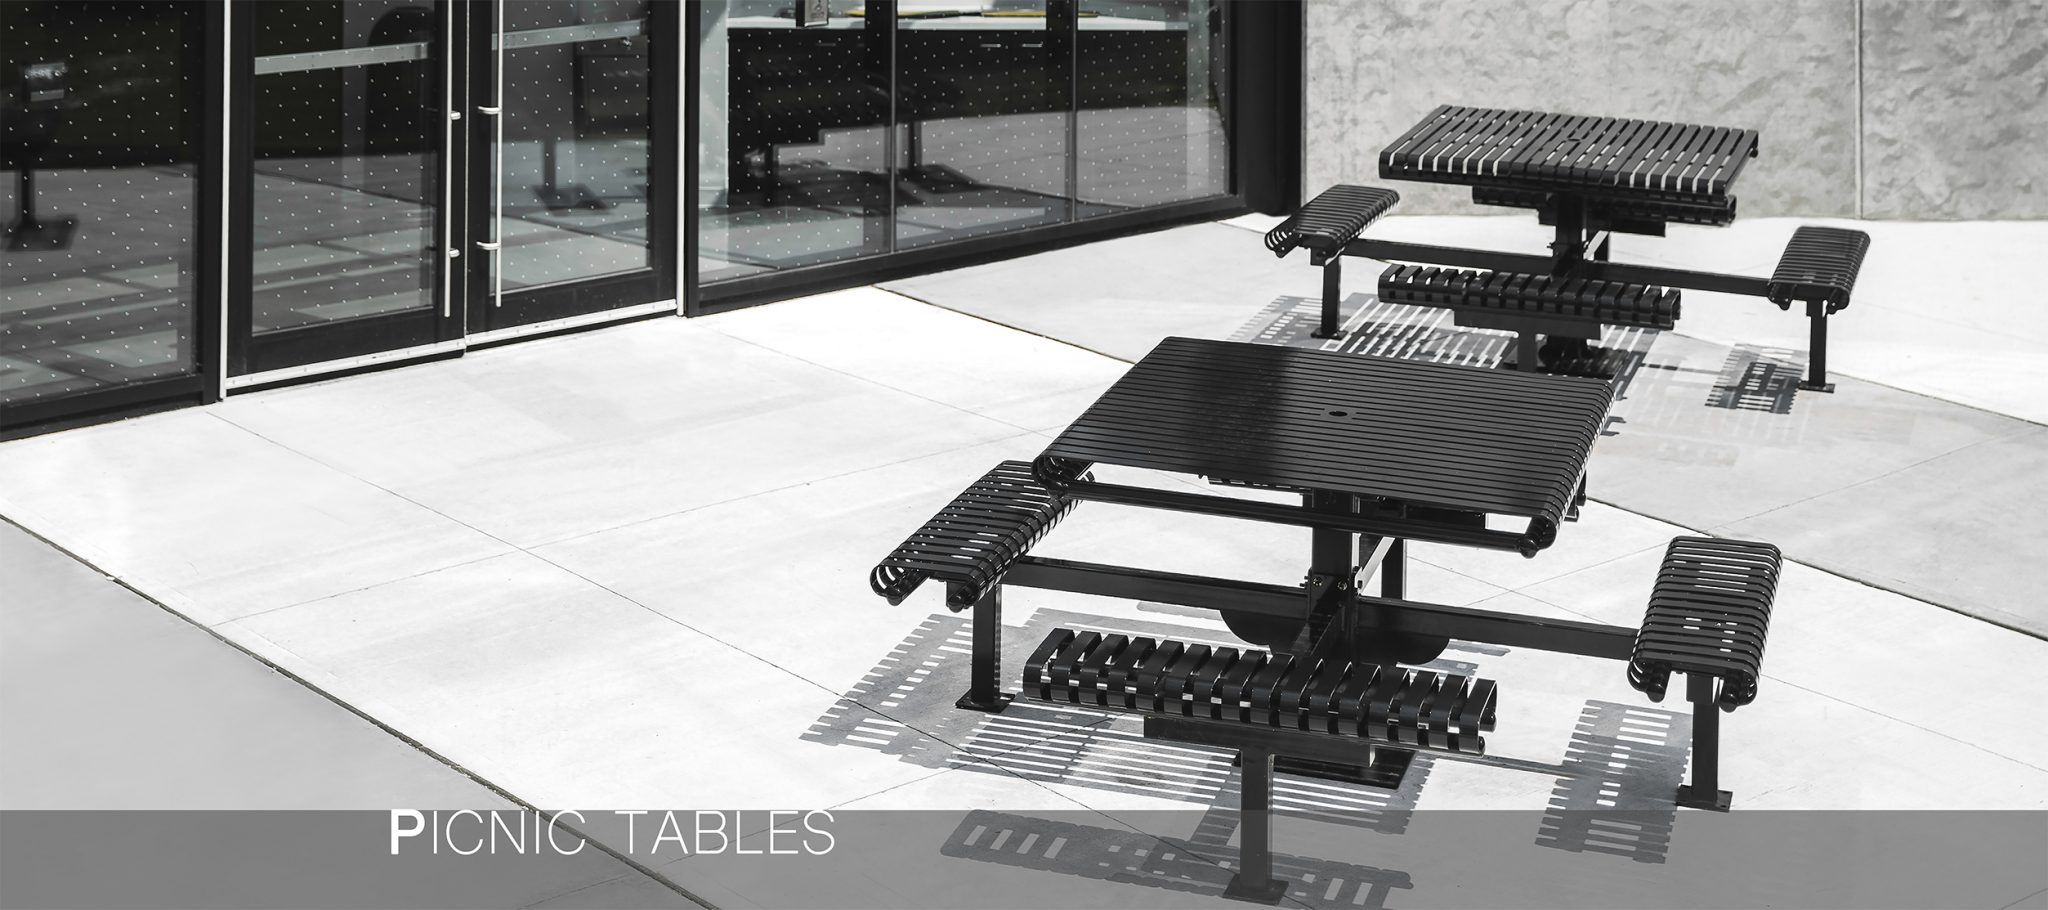 the square steel picnic table with a contemporary design makes it a perfect fit for any landscape architecture layout.